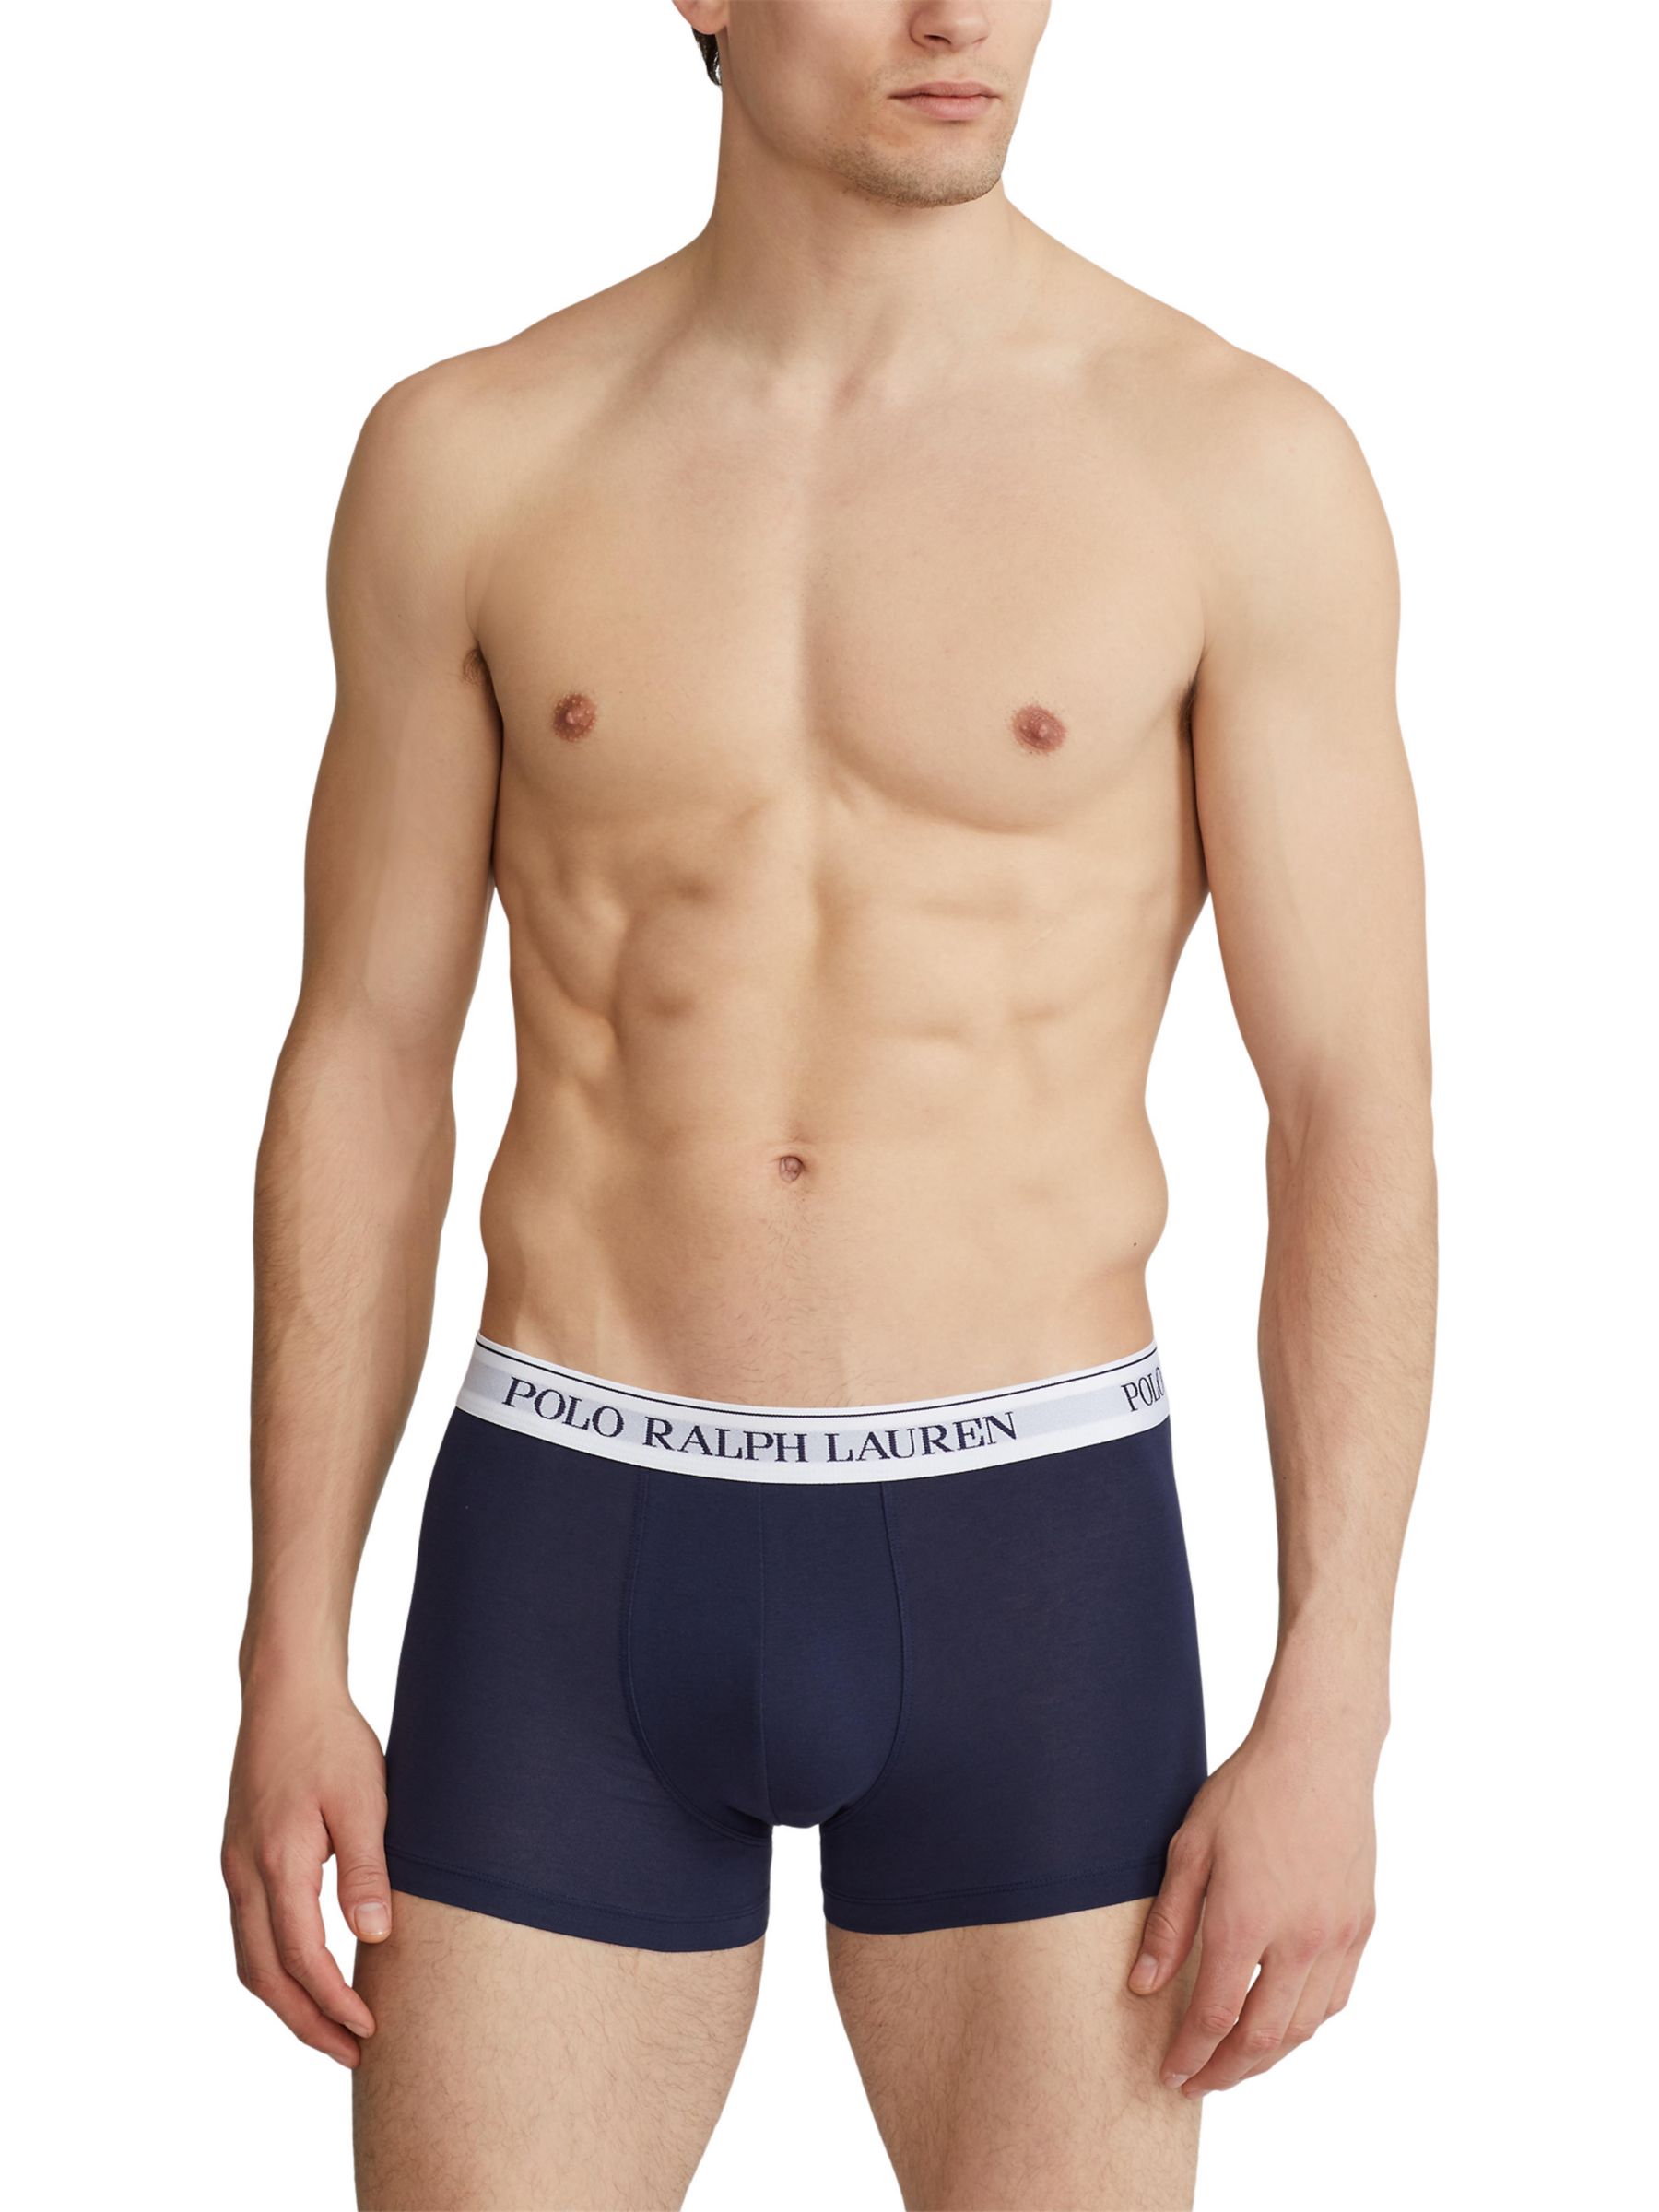 Polo Ralph Lauren Stretch Cotton Trunks, Pack of 3, Navy Print, S